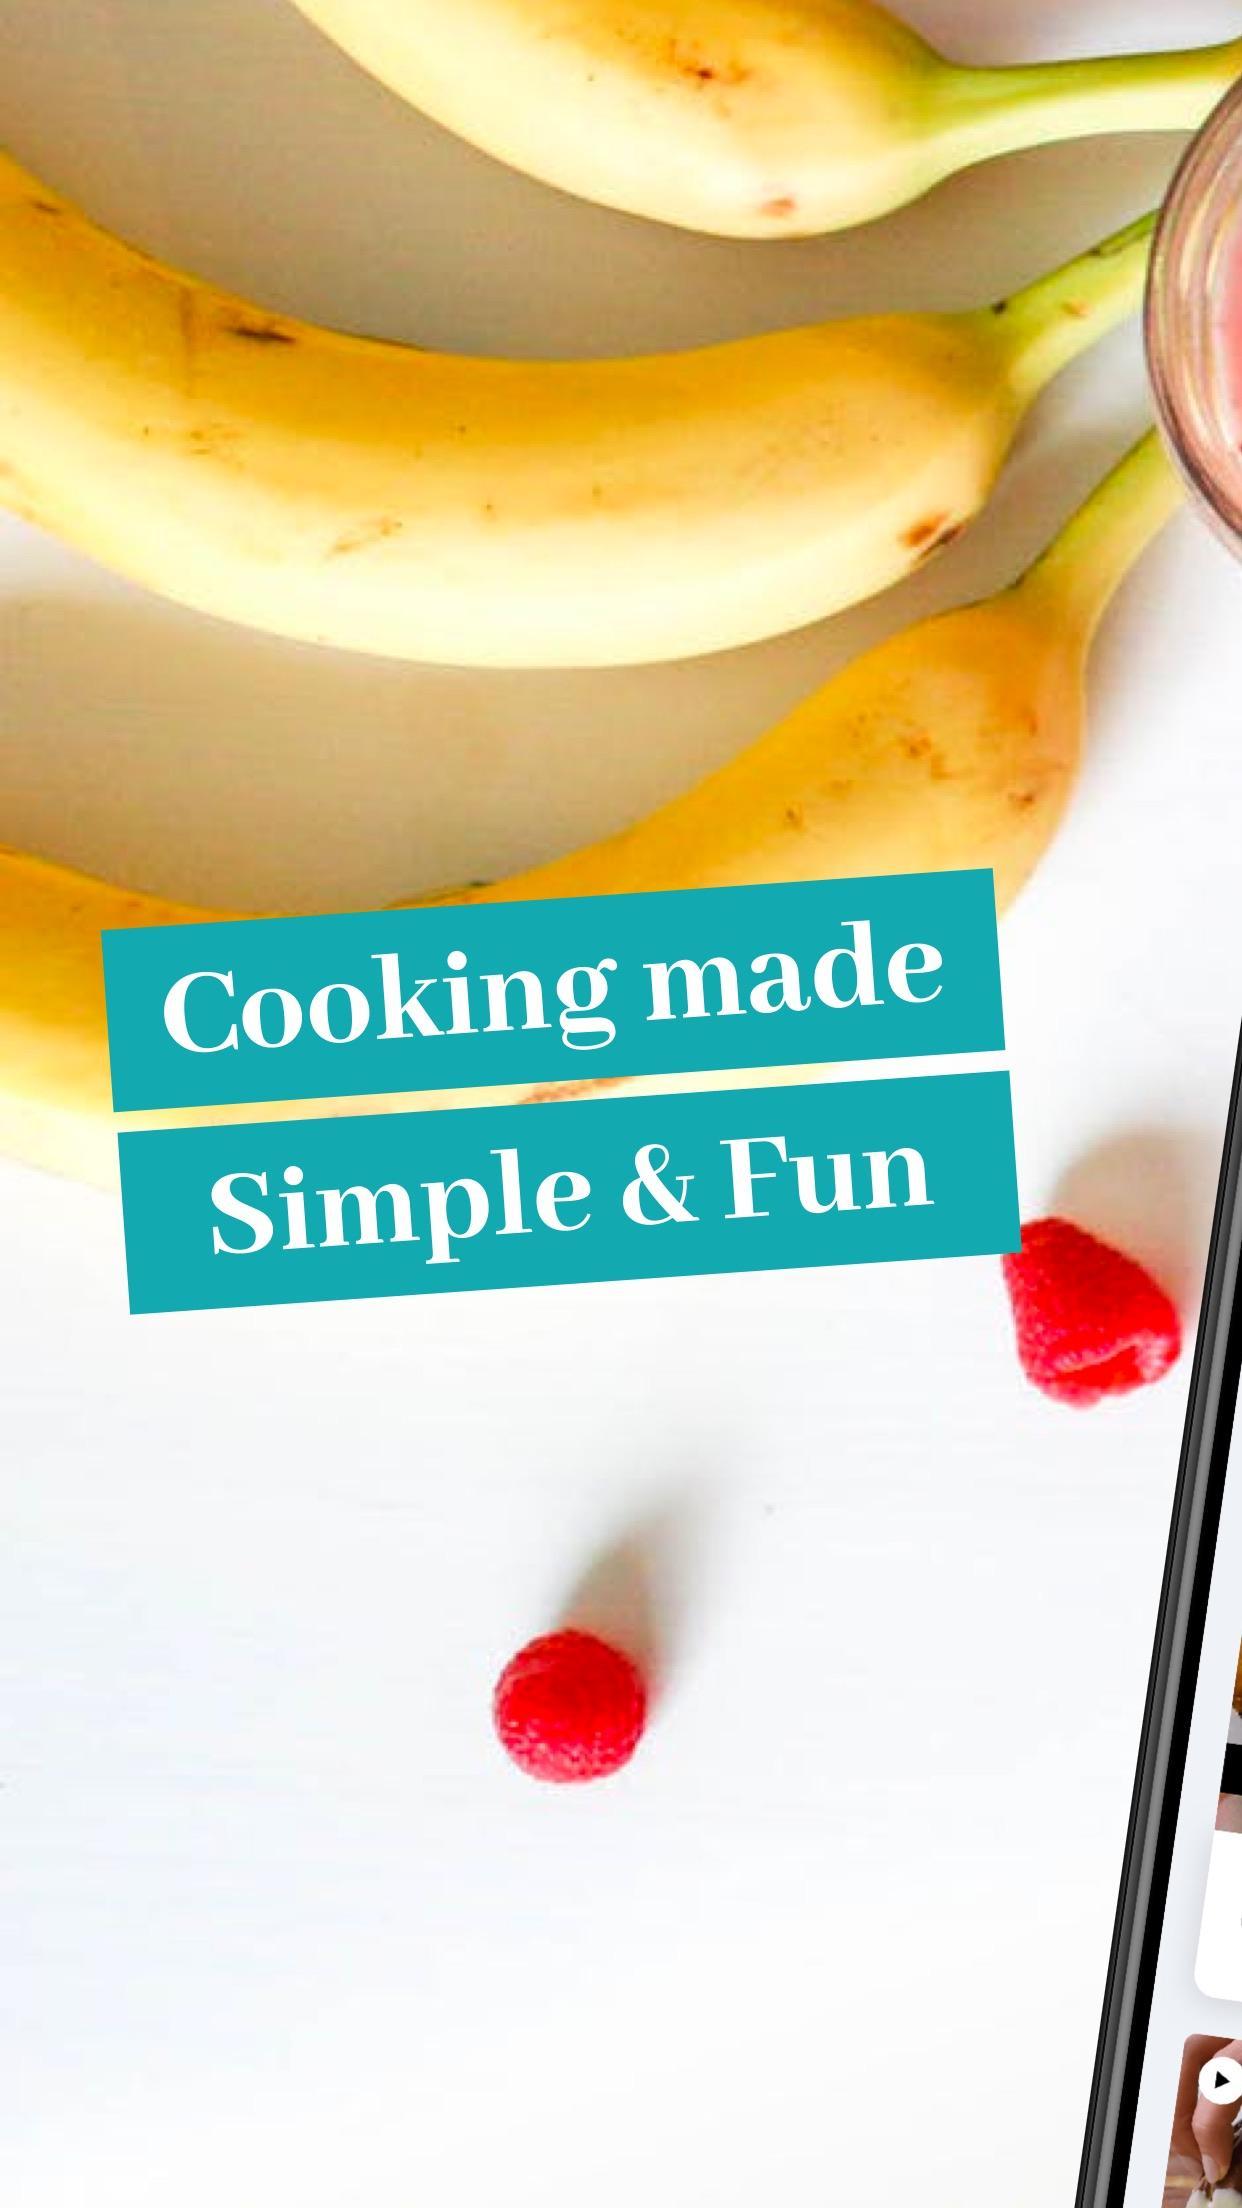 So Yummy: Viral Food Videos For Android - Apk Download